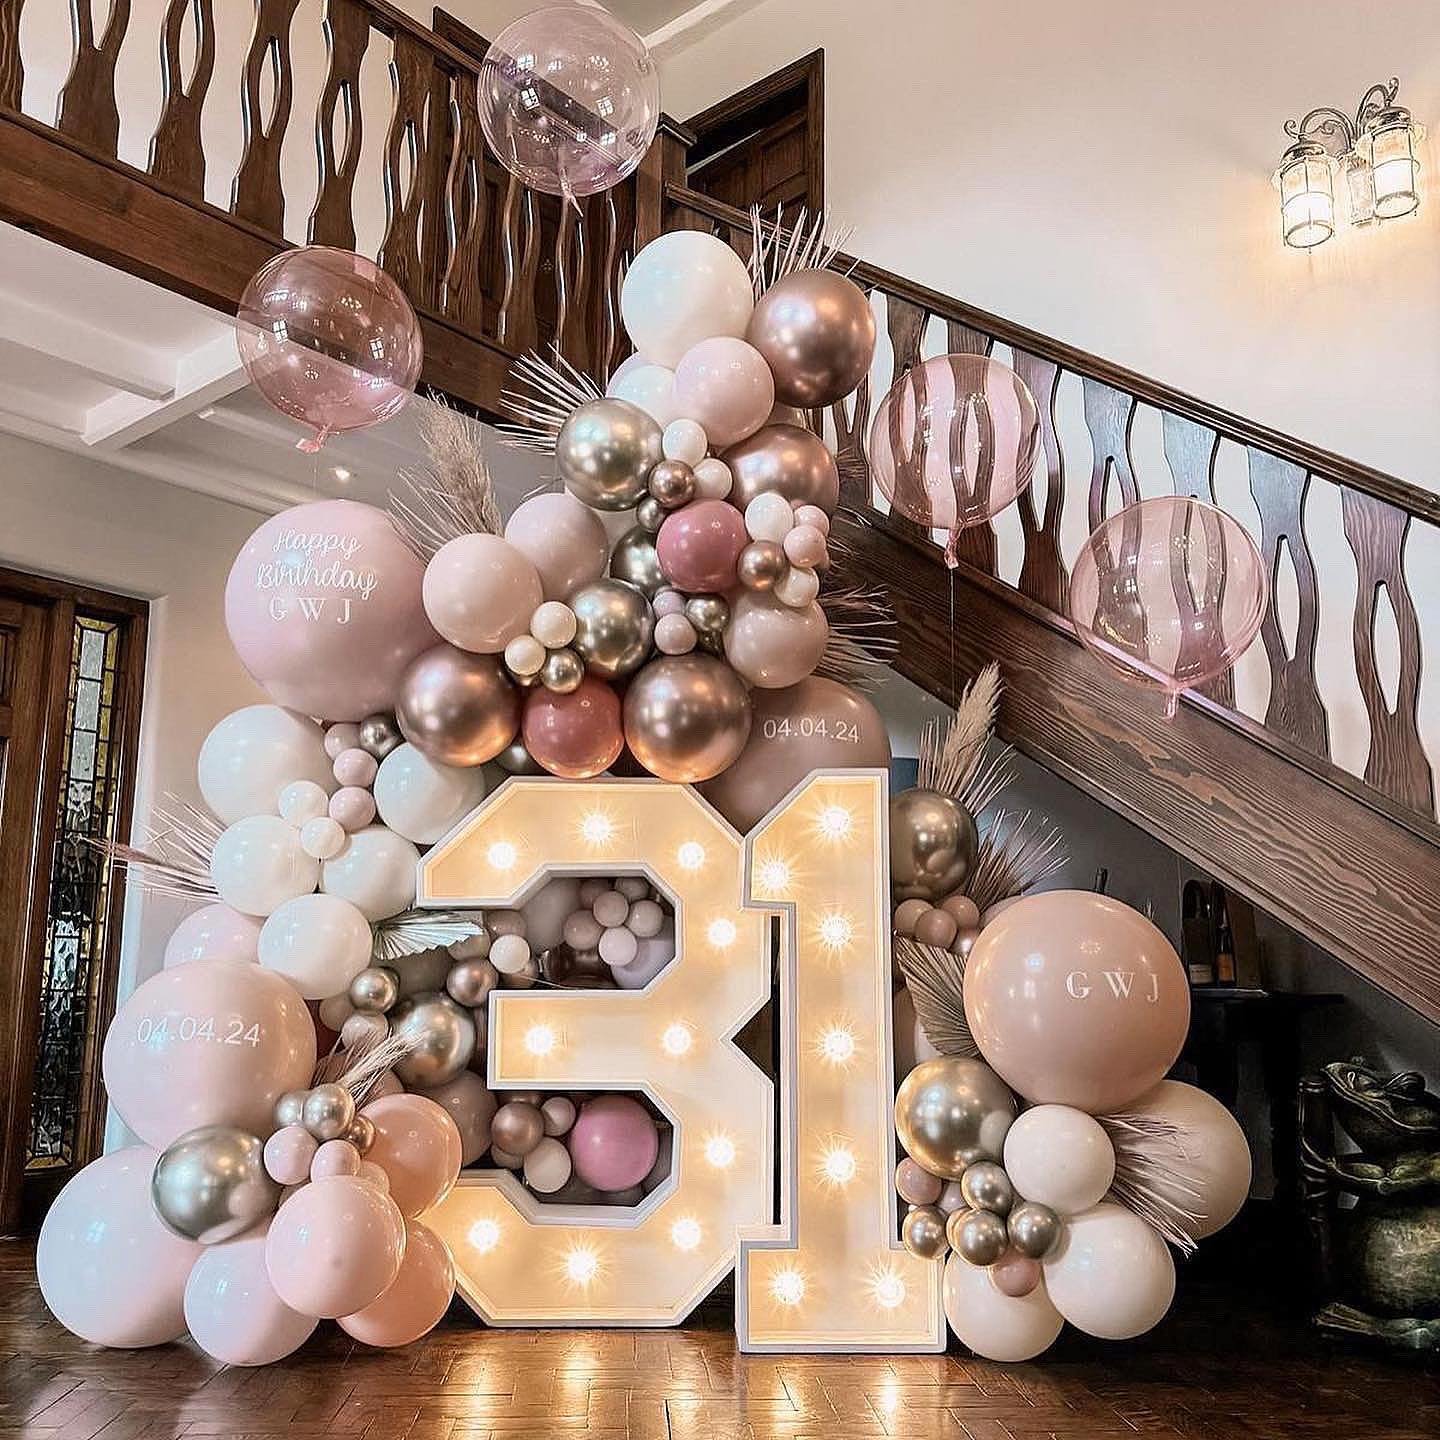 When turning 31 looks THIS GOOD!!! ✨ 😍

Our annual surprise birthday set up with @balloonboutiqueevents for @georgiawittxo and we are OBSESSED!! SWIPE LEFT ⬅️ Not gunna lie there isn&rsquo;t an install that would not look S T U N N I N G in this bea